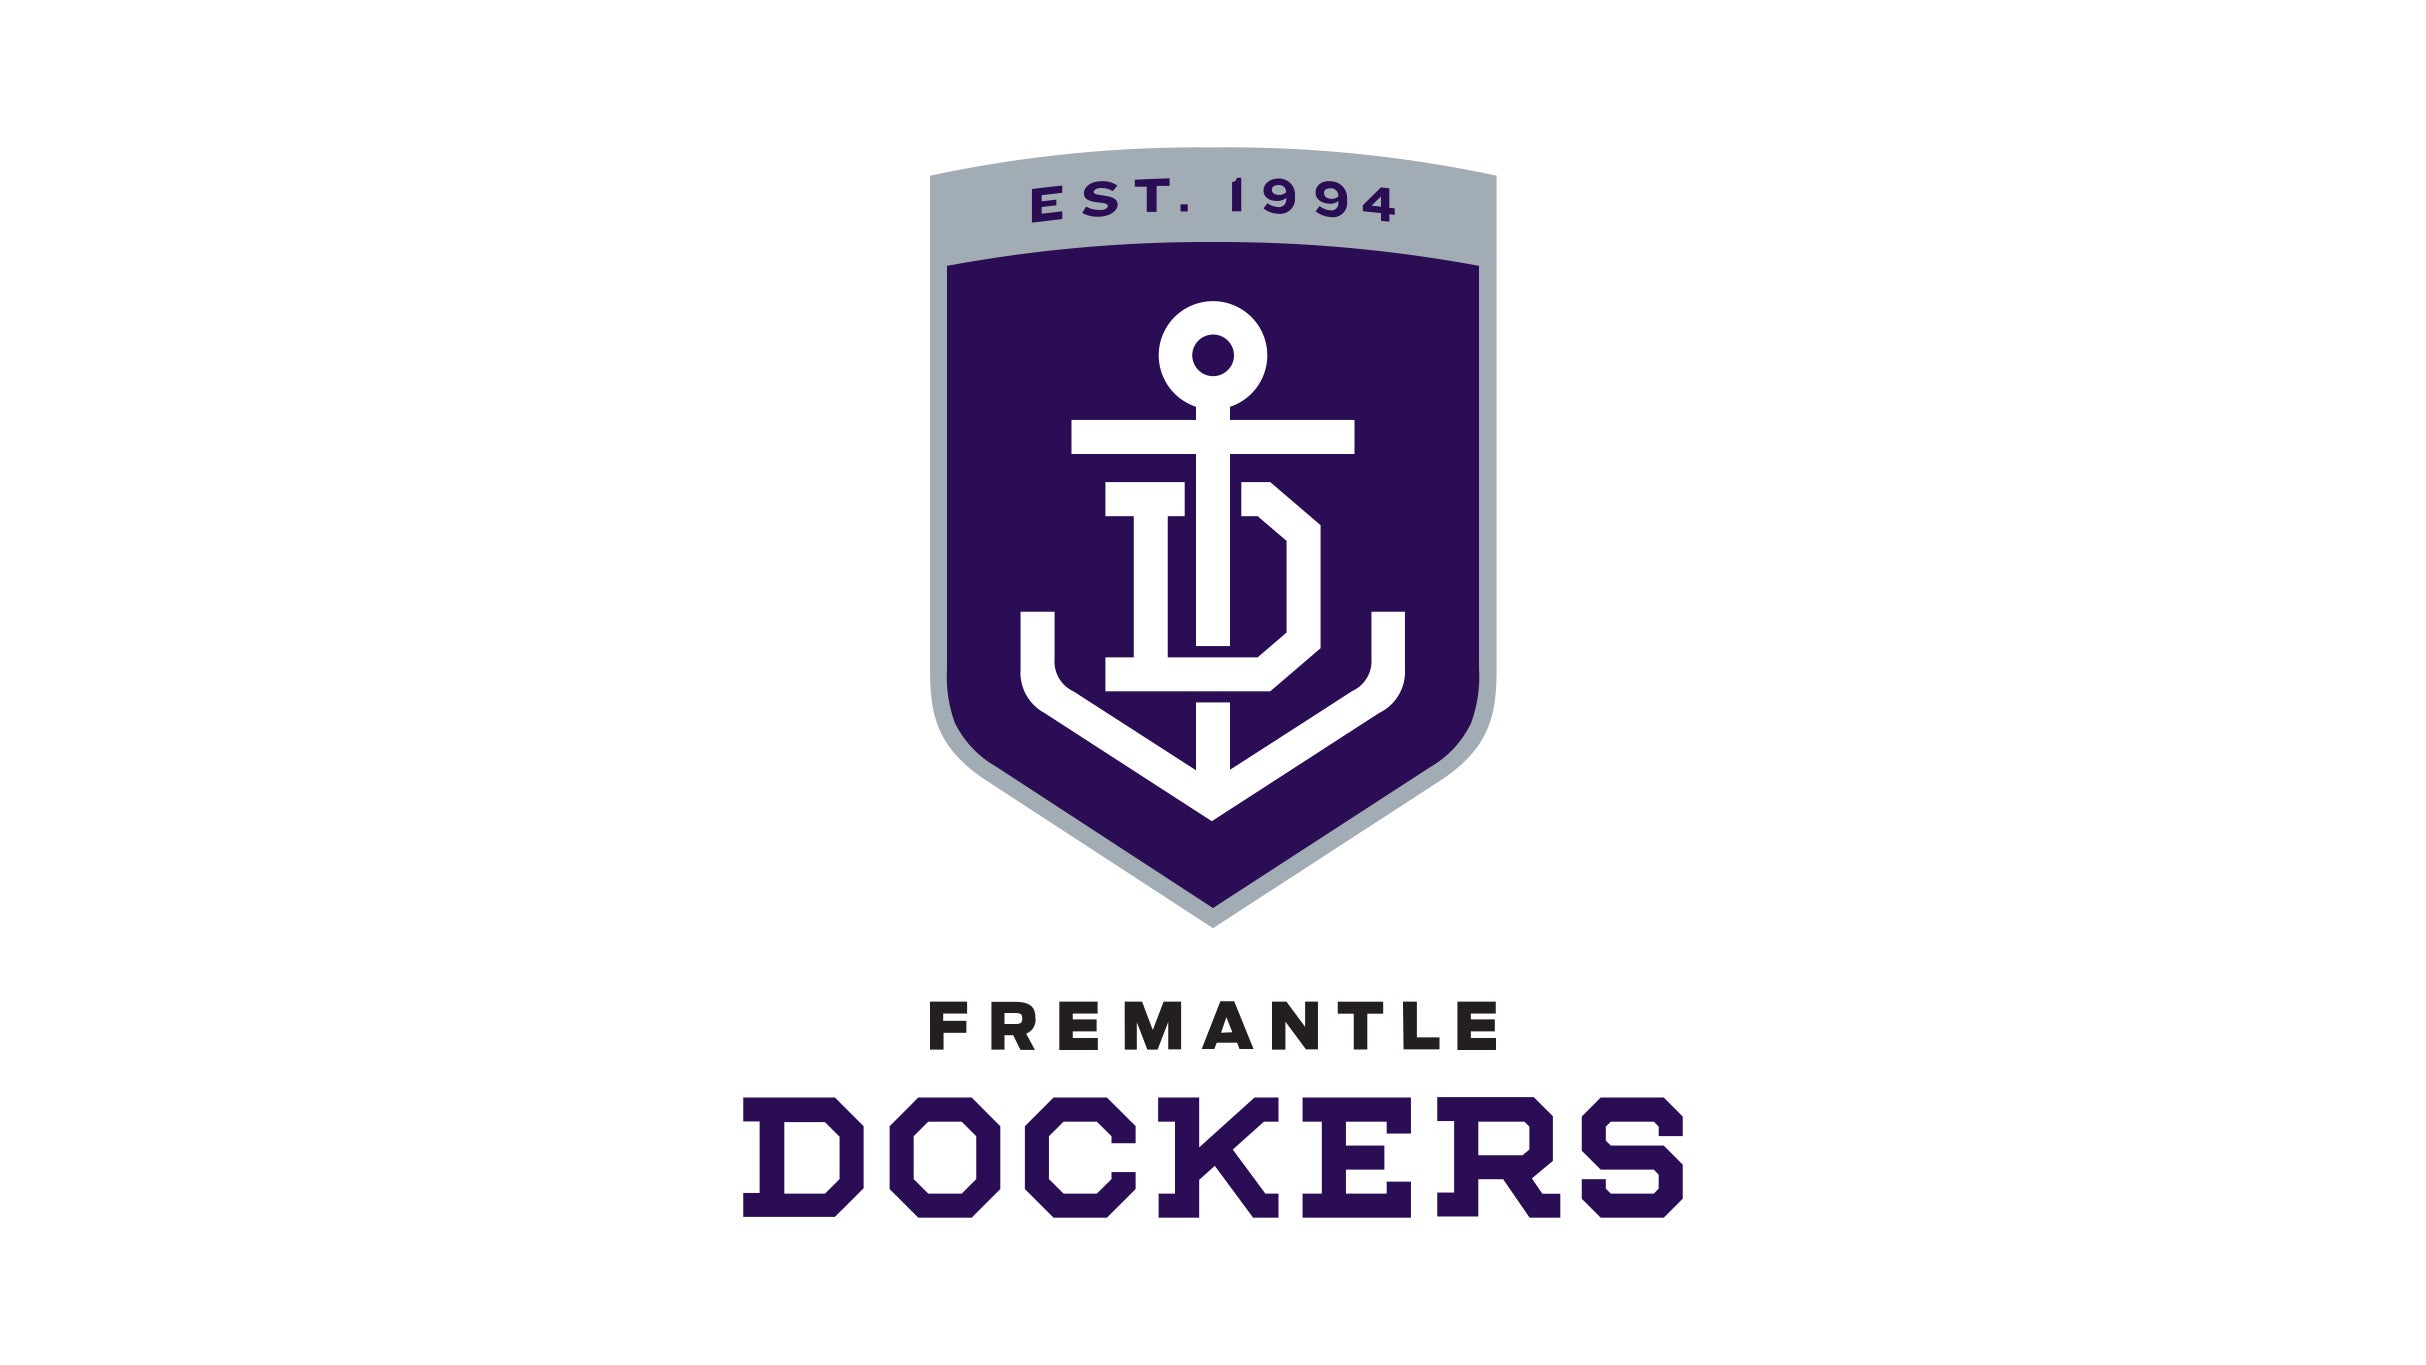 Fremantle Dockers v Geelong Cats in Burswood promo photo for Pass Holders Members Priced Upgrade presale offer code